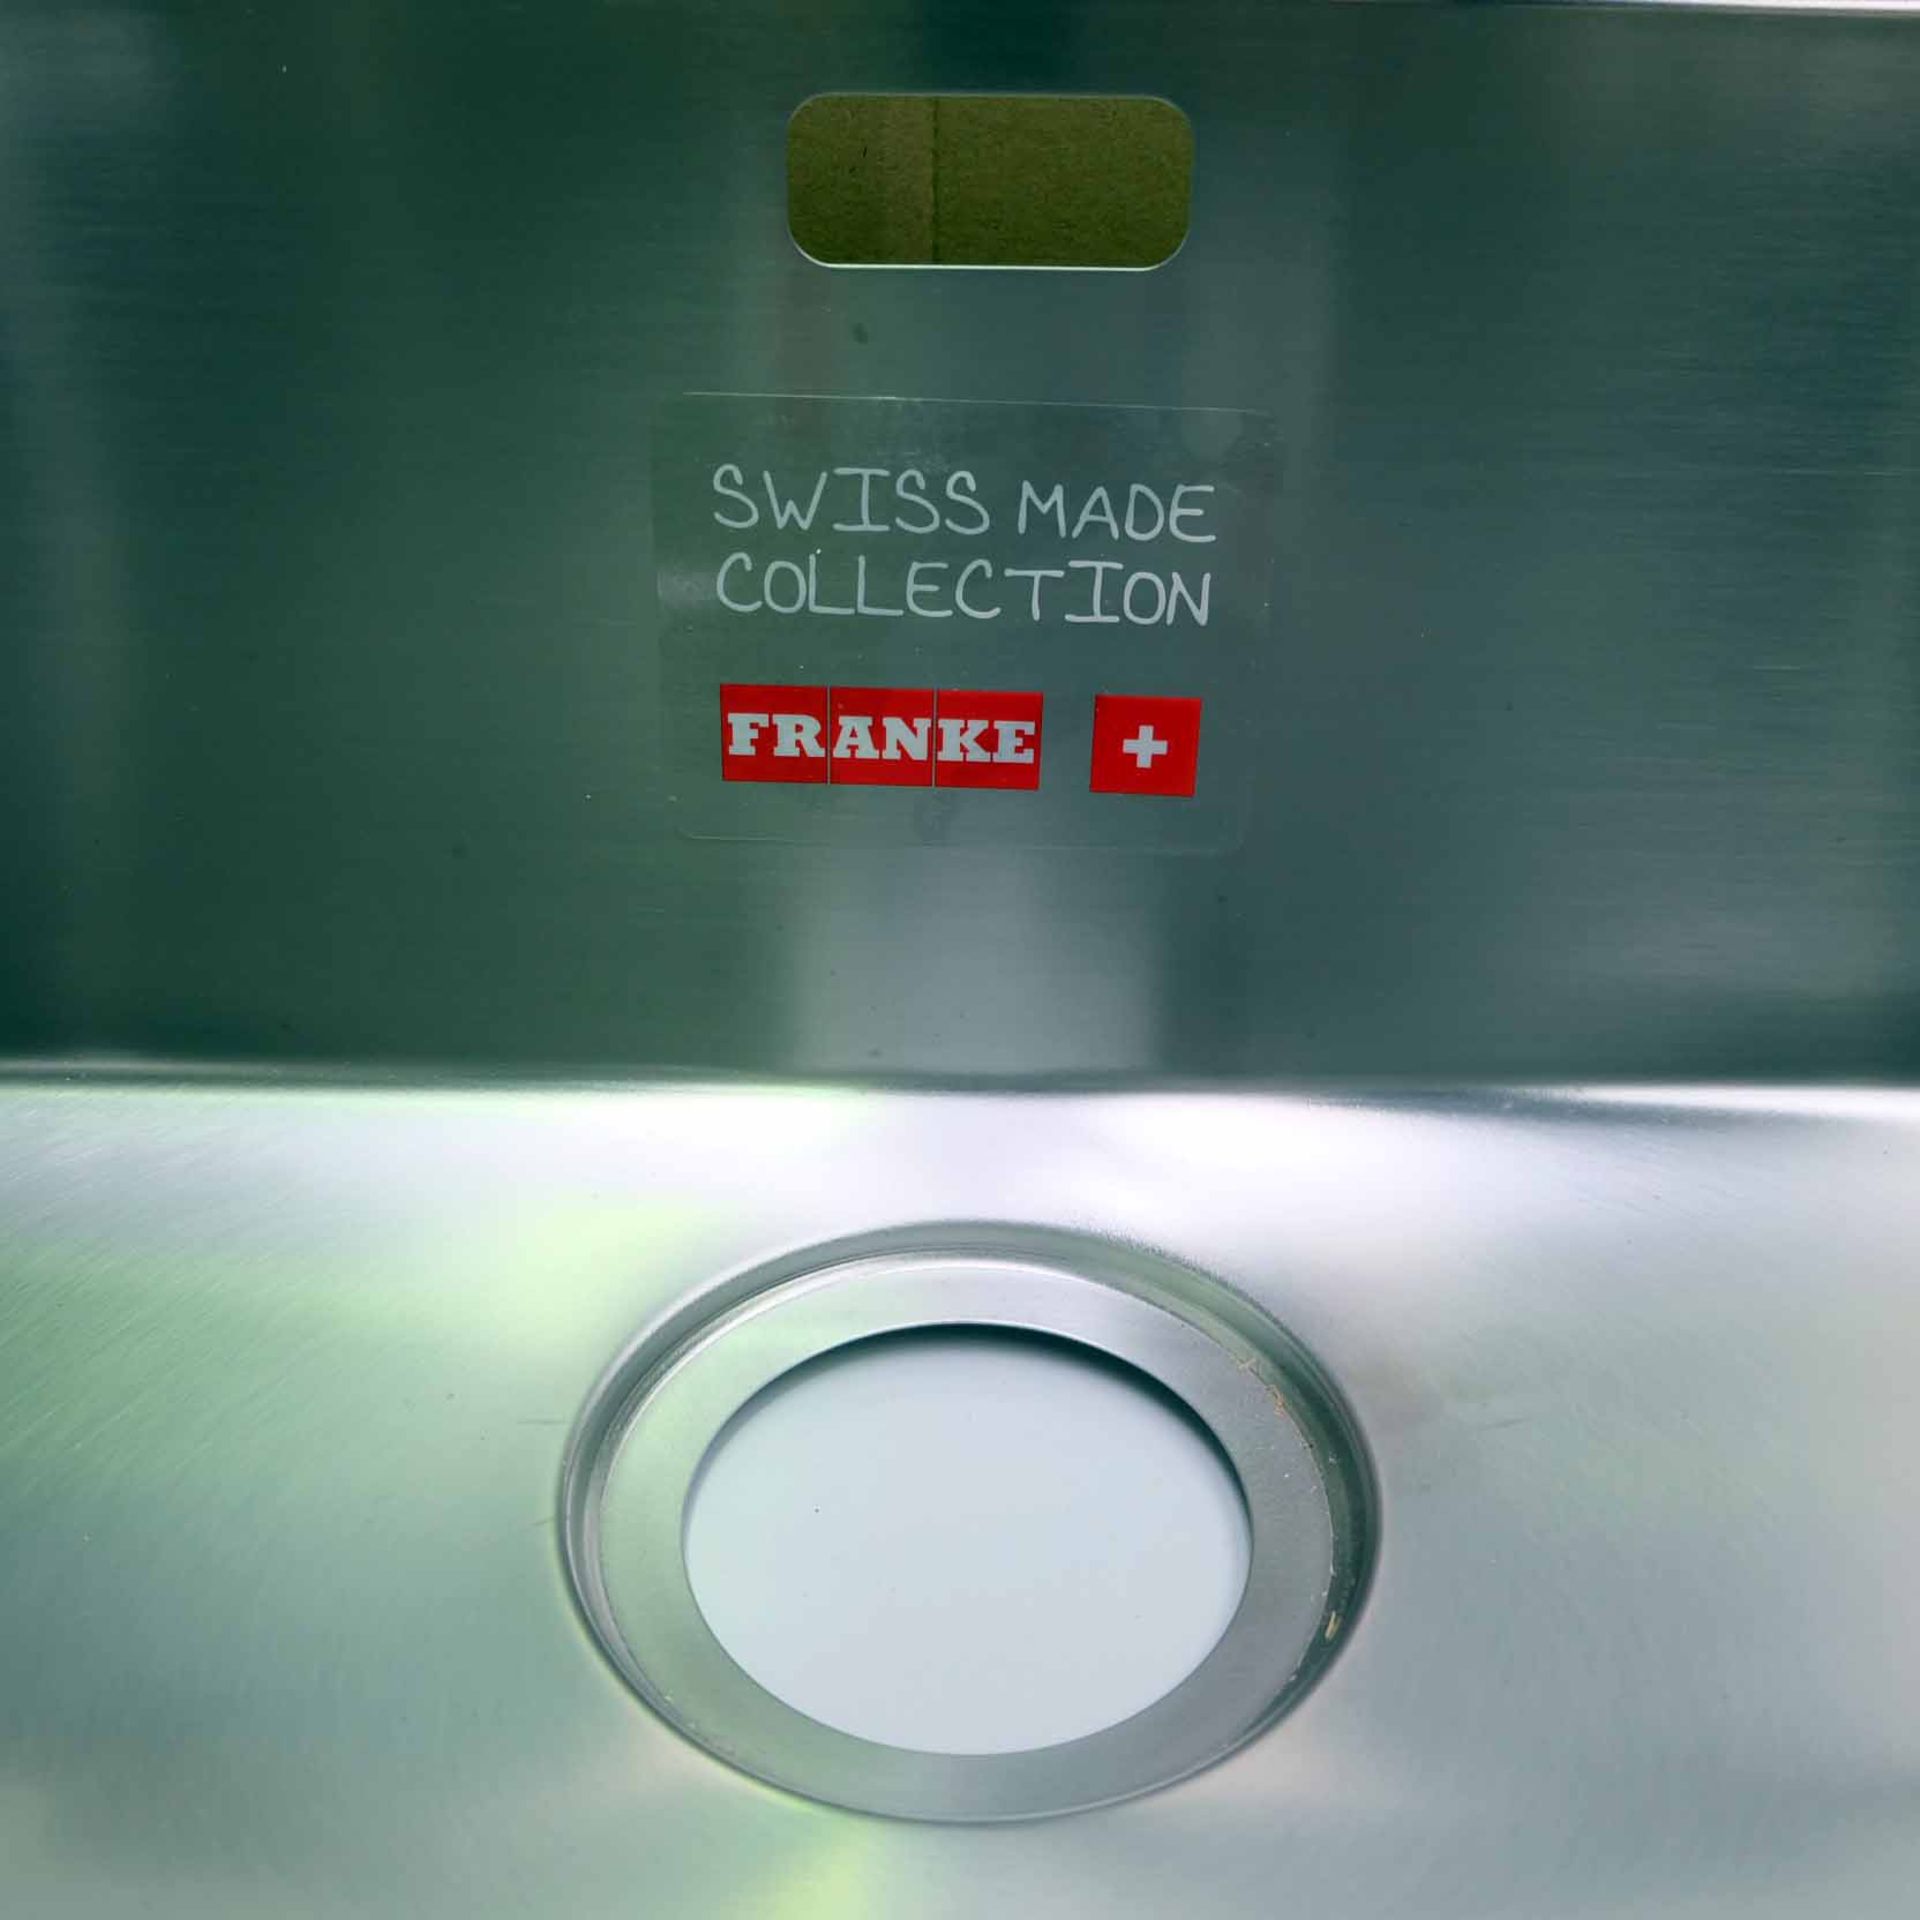 FRANKE + Swiss Made Collection Stainless Steel Sink. External Size 735mm W x 440mm D x 215mm H. Inte - Image 3 of 17